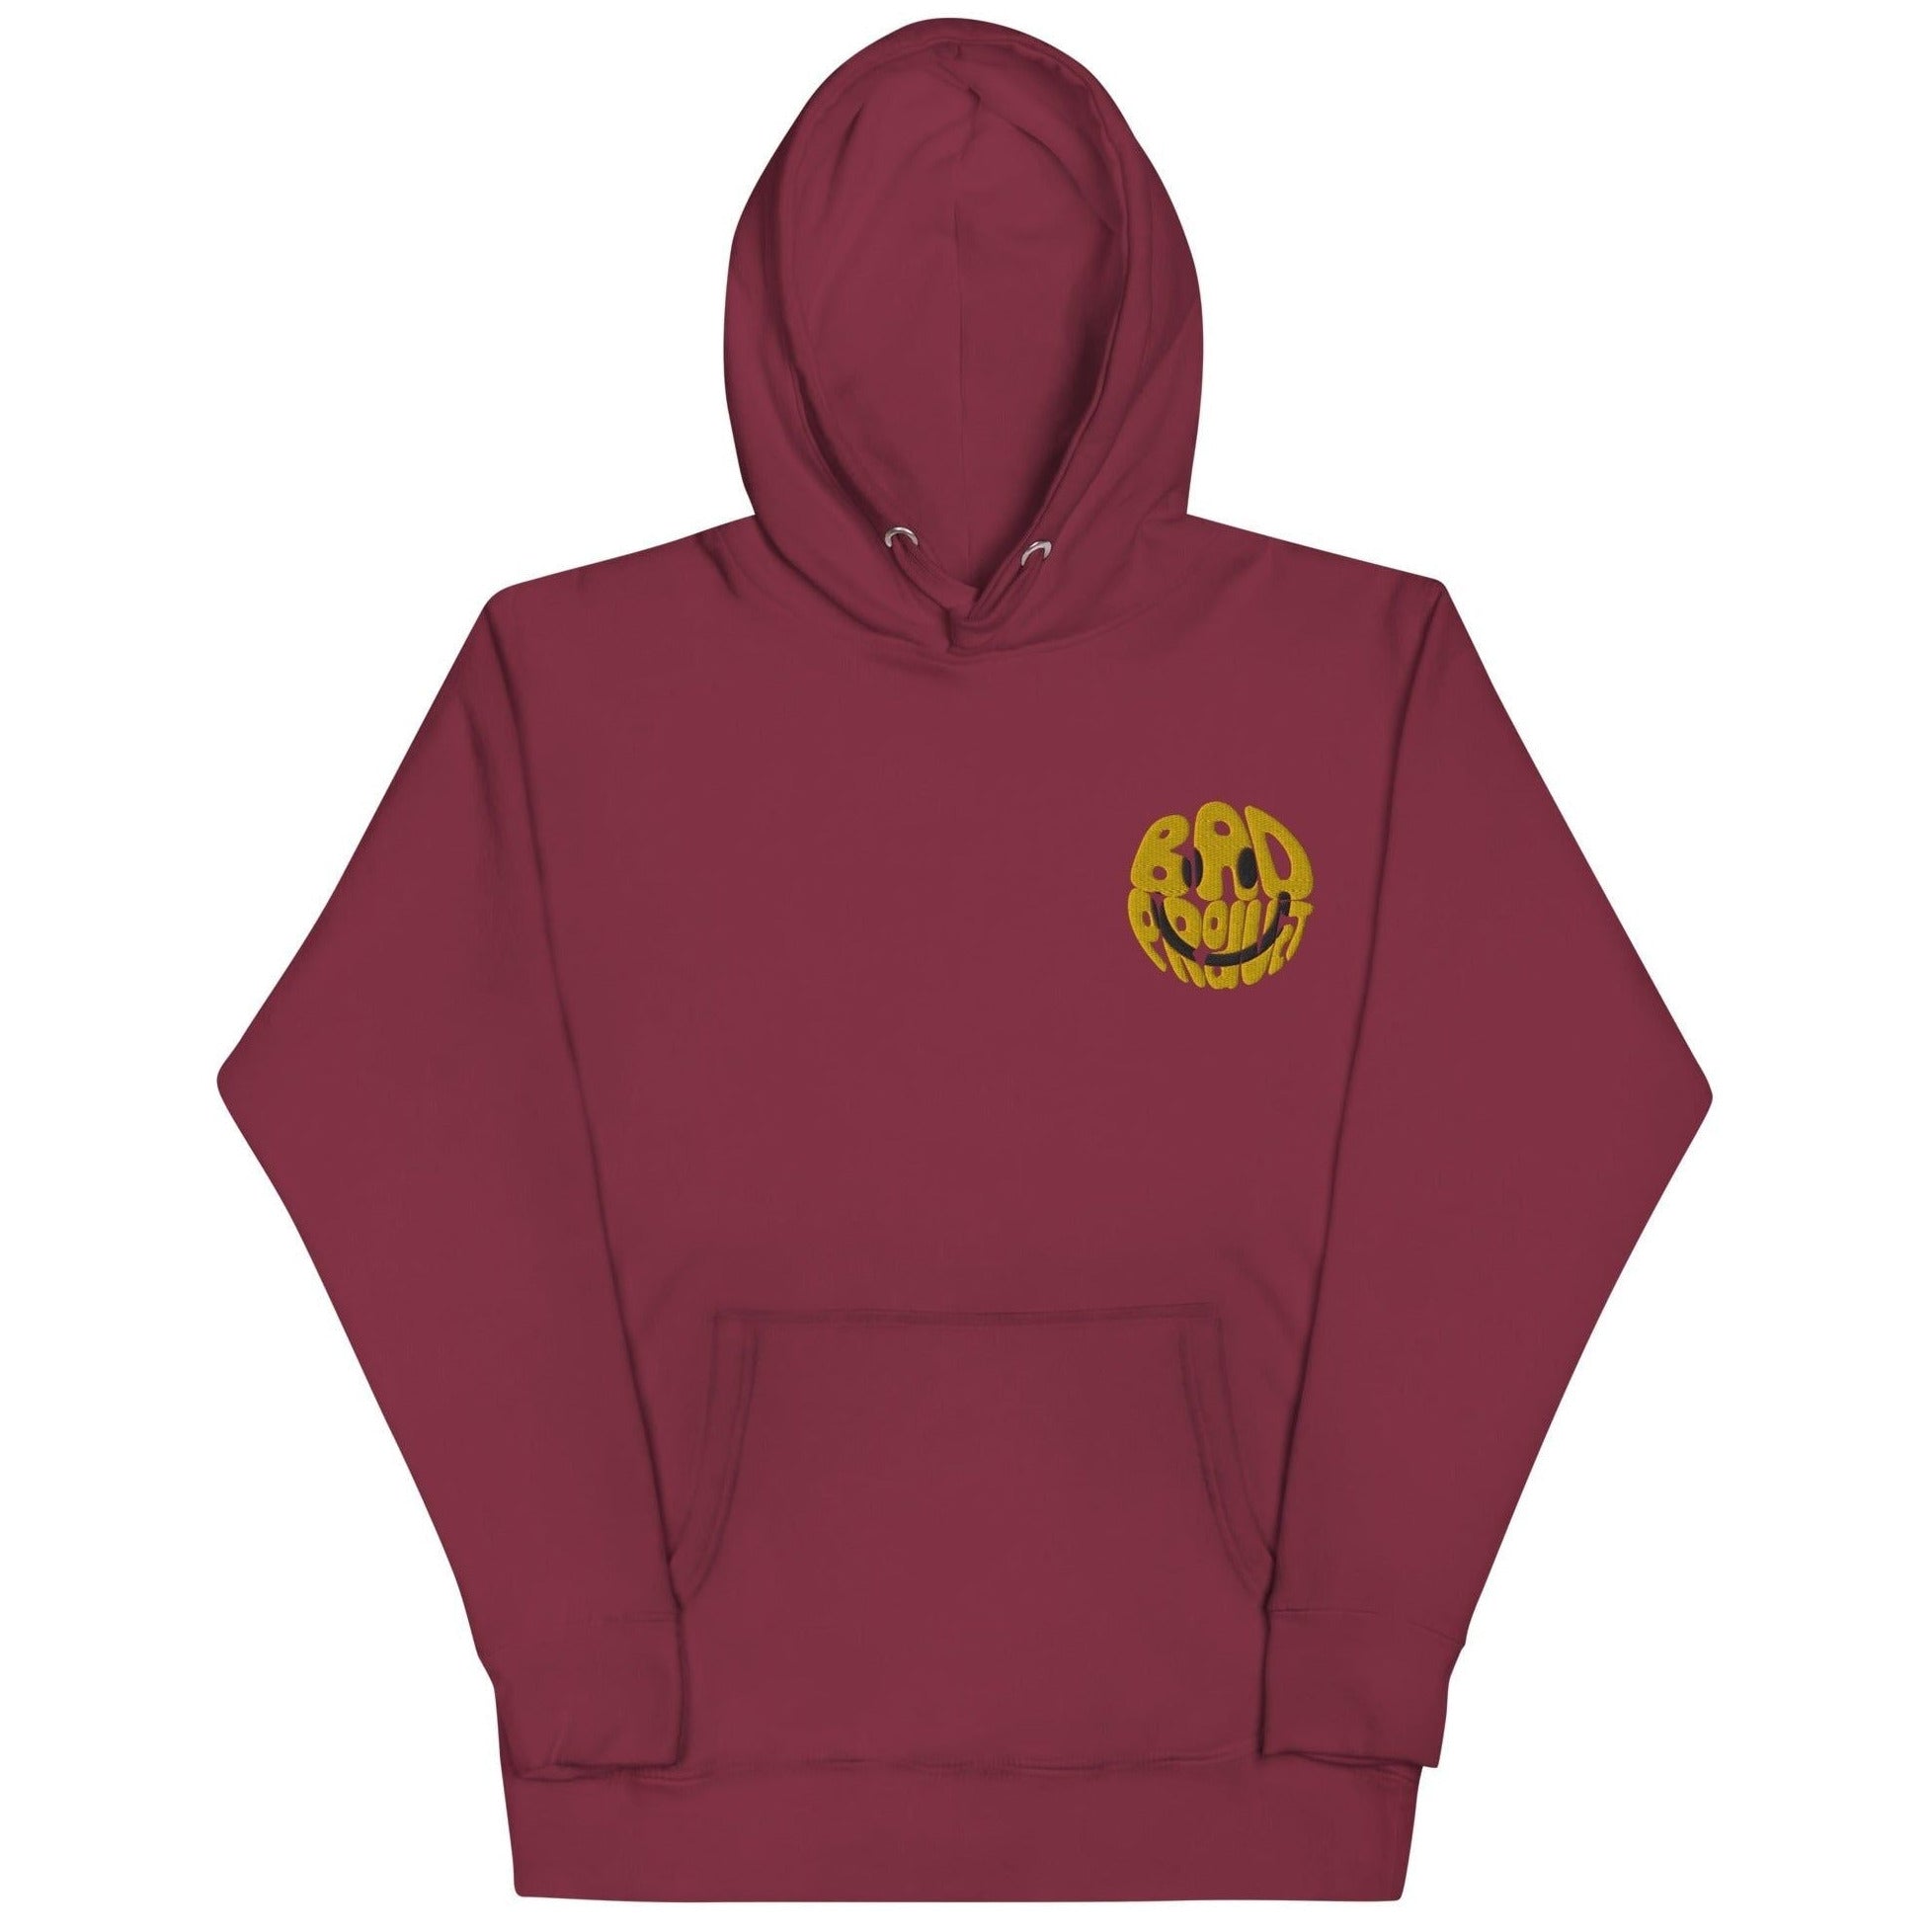 Maroon hoodie featuring an embroidered gold smiley logo